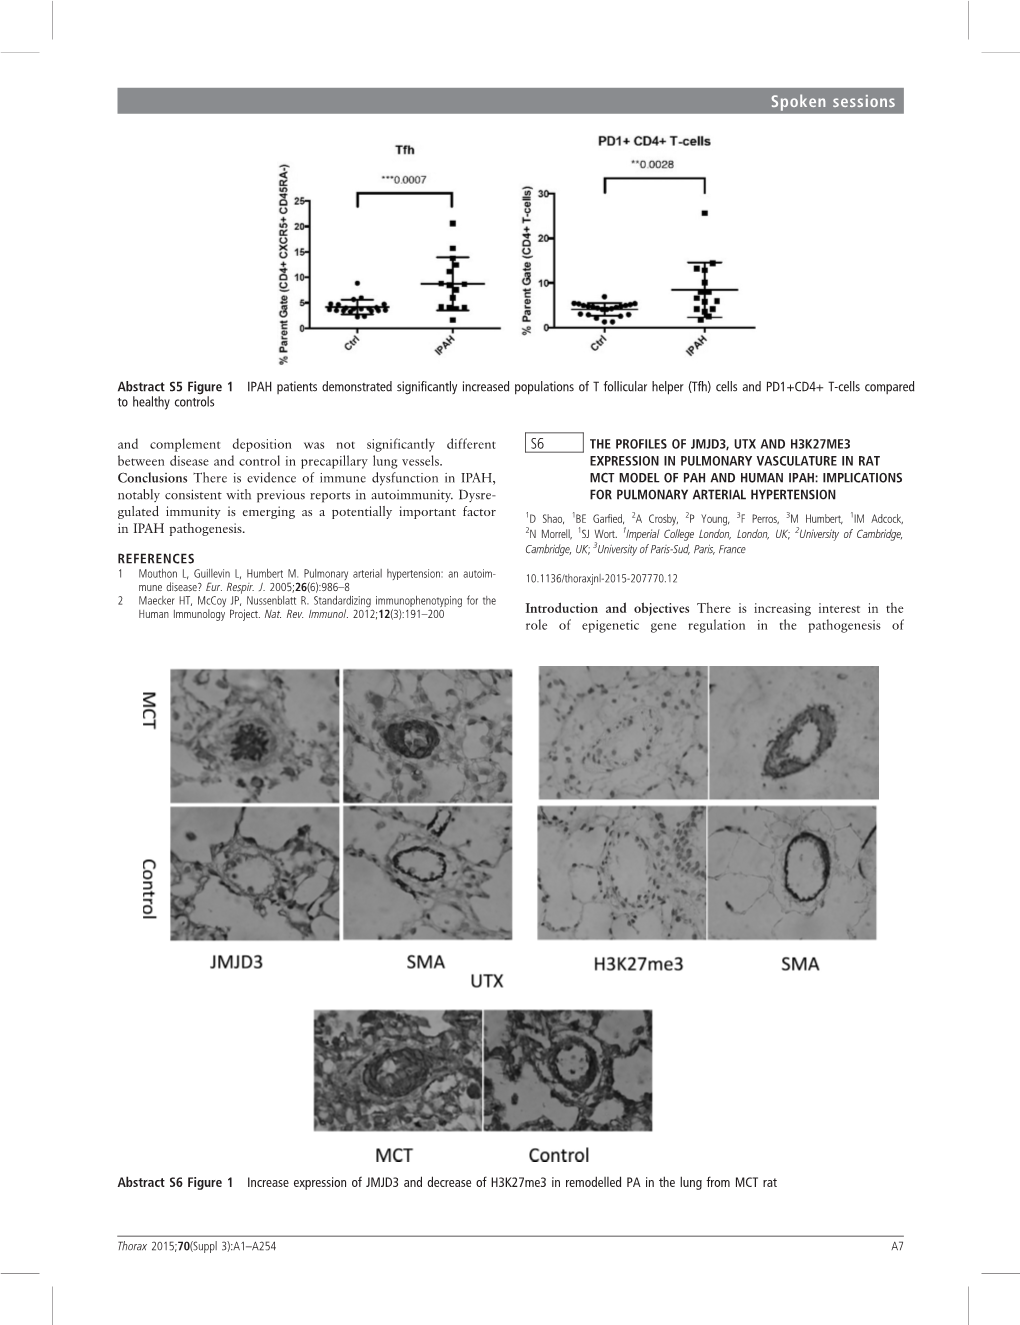 S6 the Profiles of JMJD3, UTX and H3k27me3 Expression in Pulmonary Vasculature in Rat MCT Model of PAH and Human Ipah: Implications for Pulmonary Arterial Hypertension